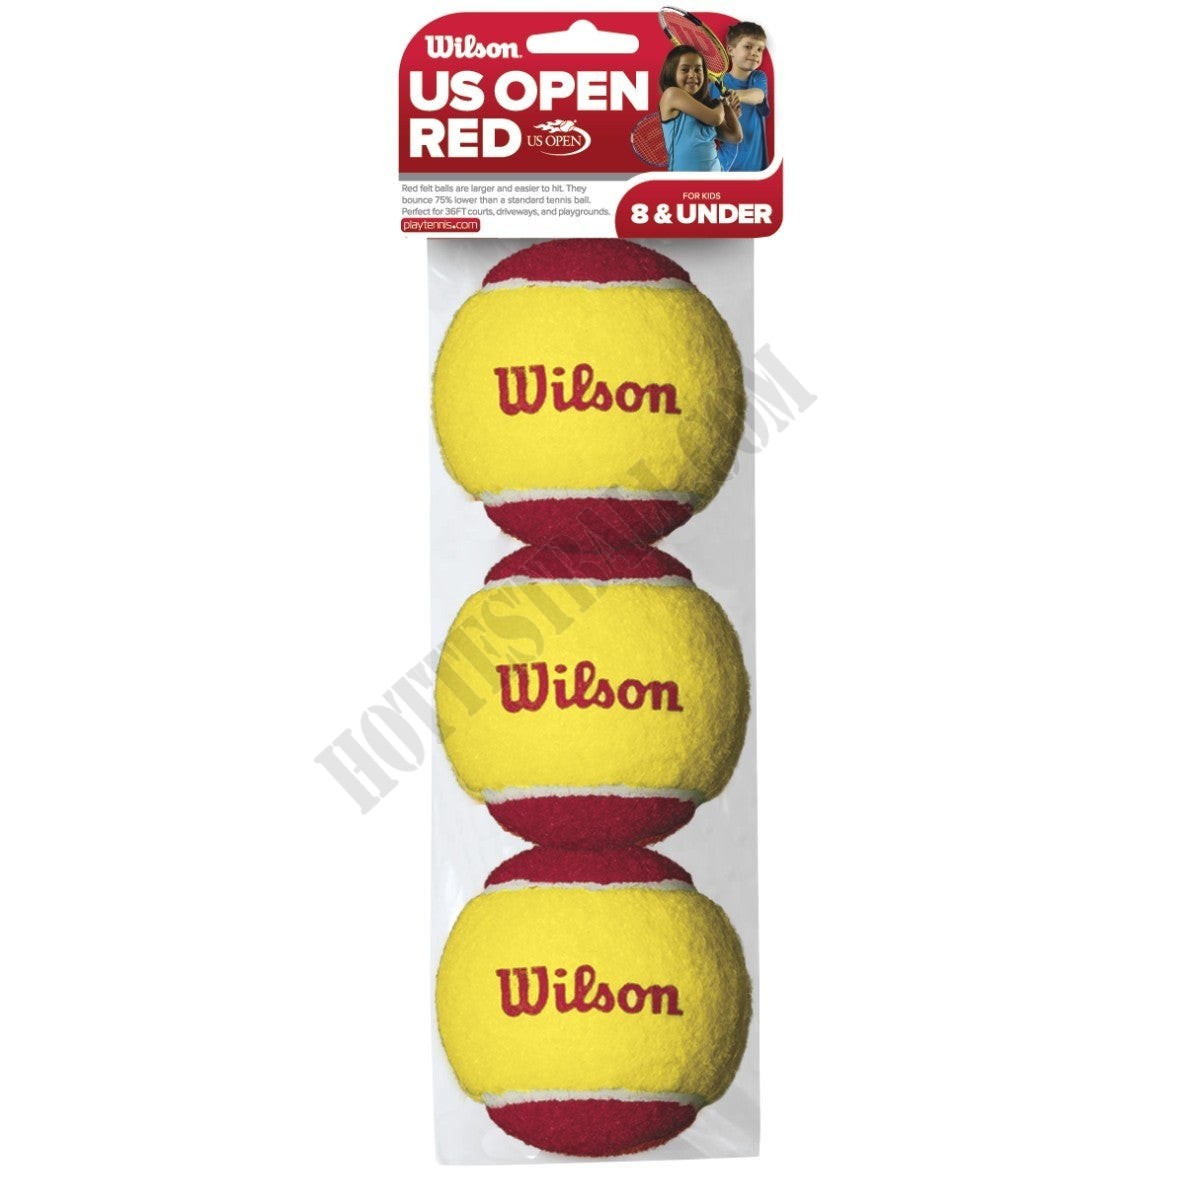 US Open Red Tournament Transition Tennis Balls (Ages 8 & Under) - Wilson Discount Store - -0